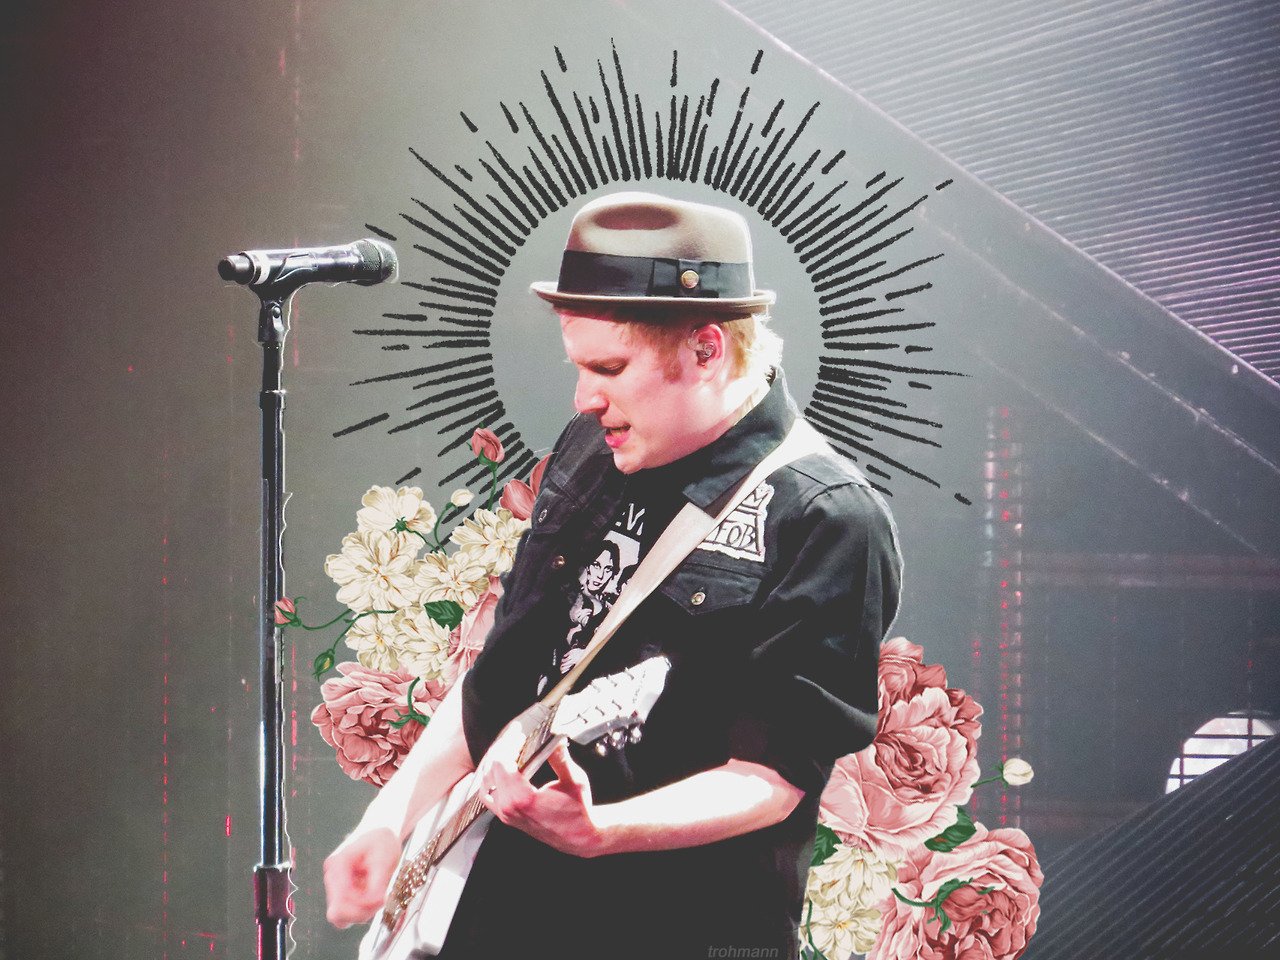 Today is a good day. Today is the Birthday of someone really special. Happy Birthday Patrick Stump 